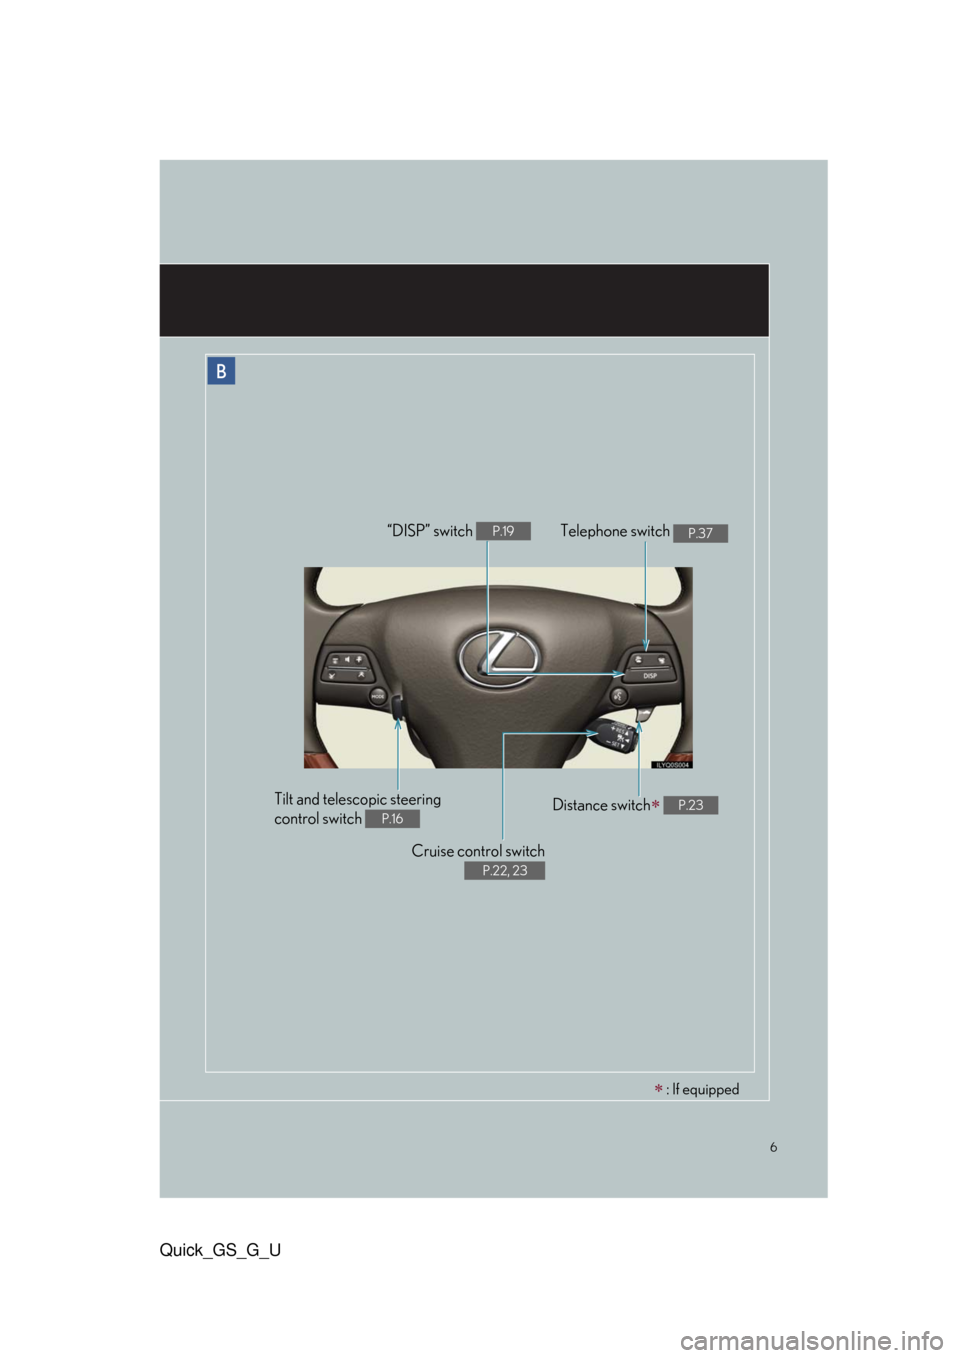 Lexus GS350 2010  Using The Audio System / LEXUS 2010 GS460/350 QUICK GUIDE OWNERS MANUAL (OM30B76U) 6
Quick_GS_G_U
B
Cruise control switch
 
P.22, 23
Telephone switch P.37“DISP” switch P.19
Distance switch P.23Tilt and telescopic steering 
control switch 
P.16
 : If equipped 